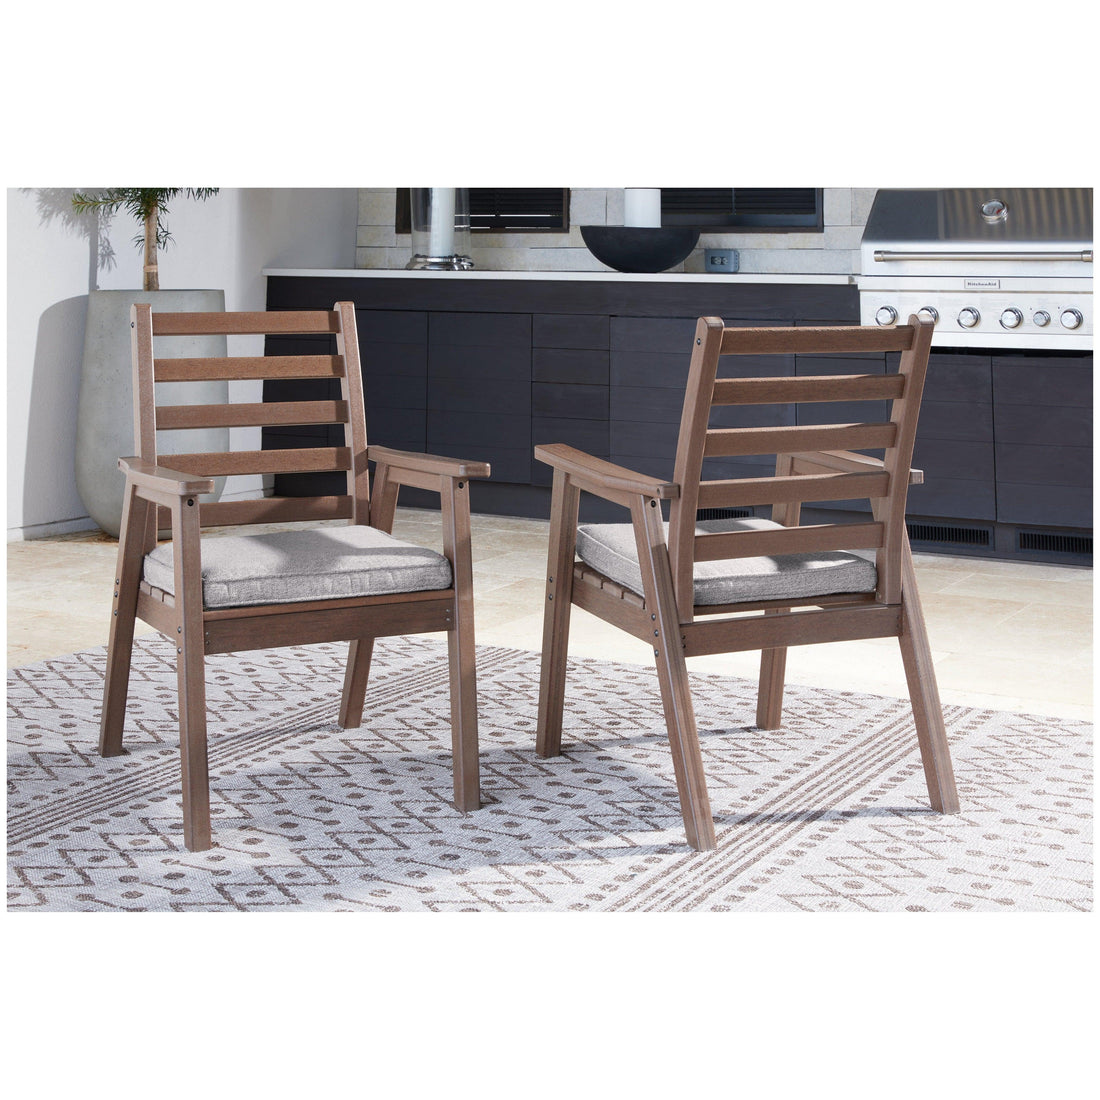 Emmeline Outdoor Dining Arm Chair with Cushion (Set of 2) Ash-P420-601A